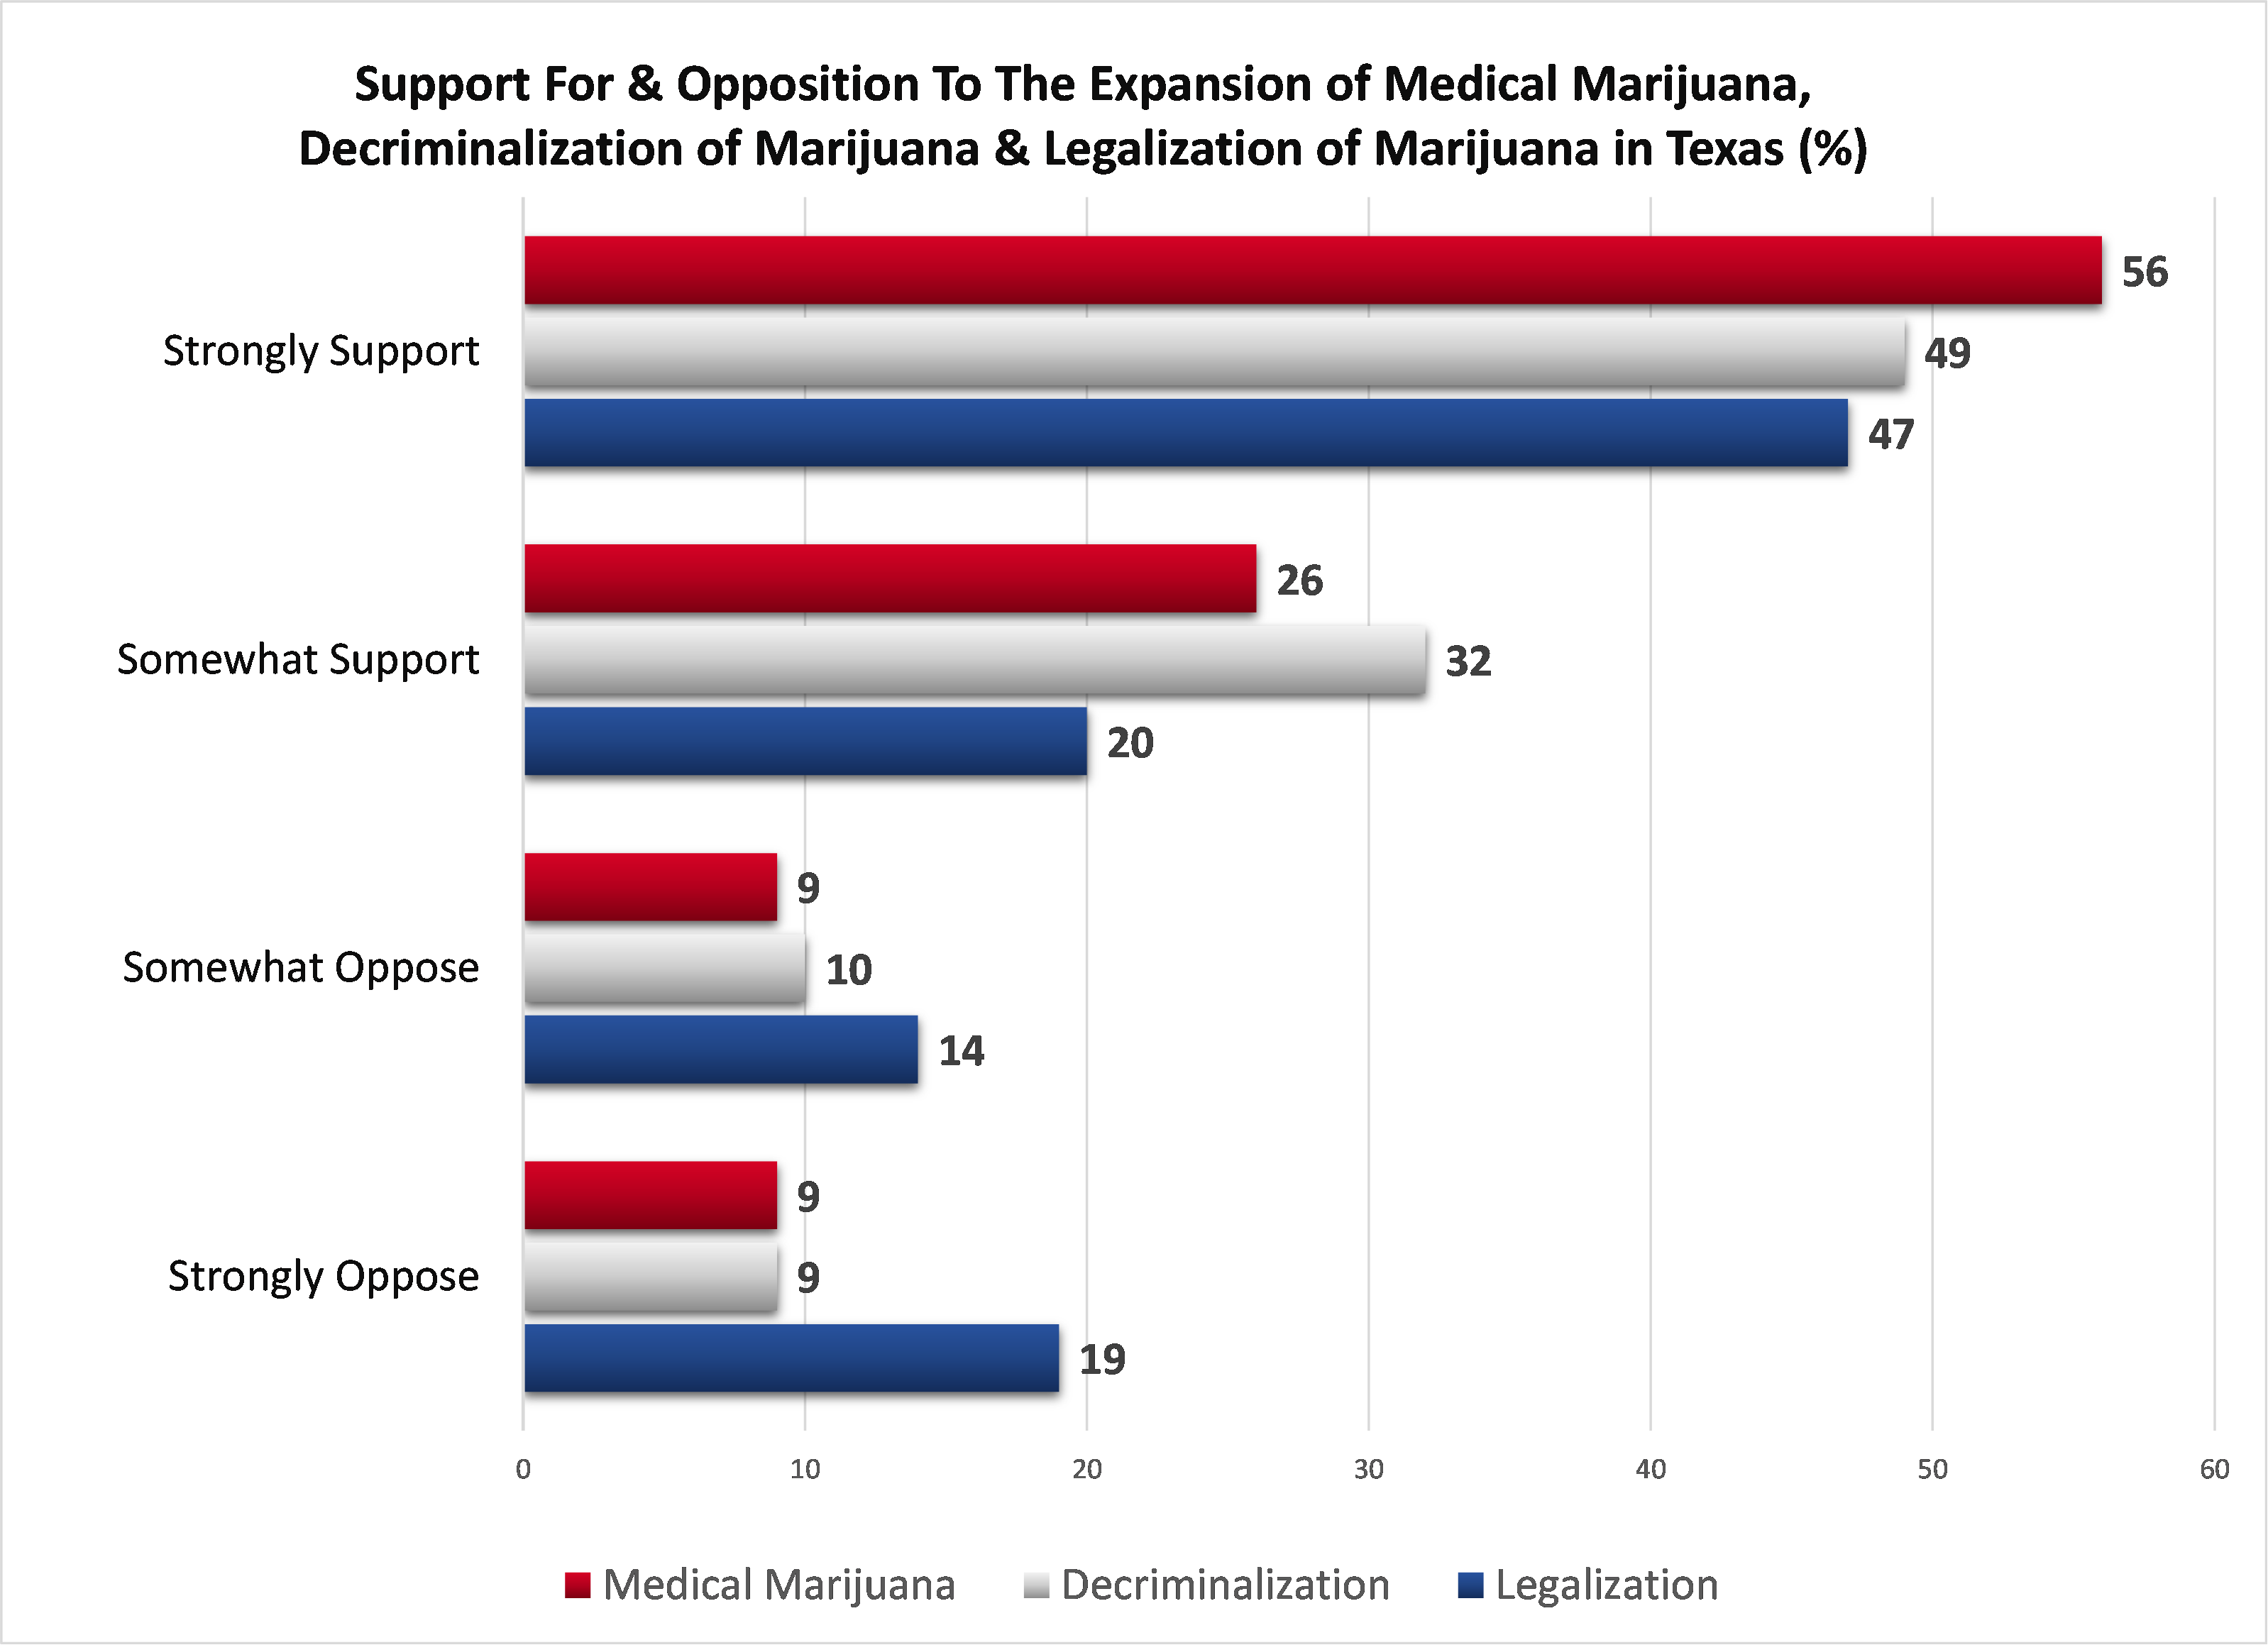 Graph image- Support for and opposition to the expansion of medical marijuana, decriminalization of marijuana and legalization of marijuana in Texas. 